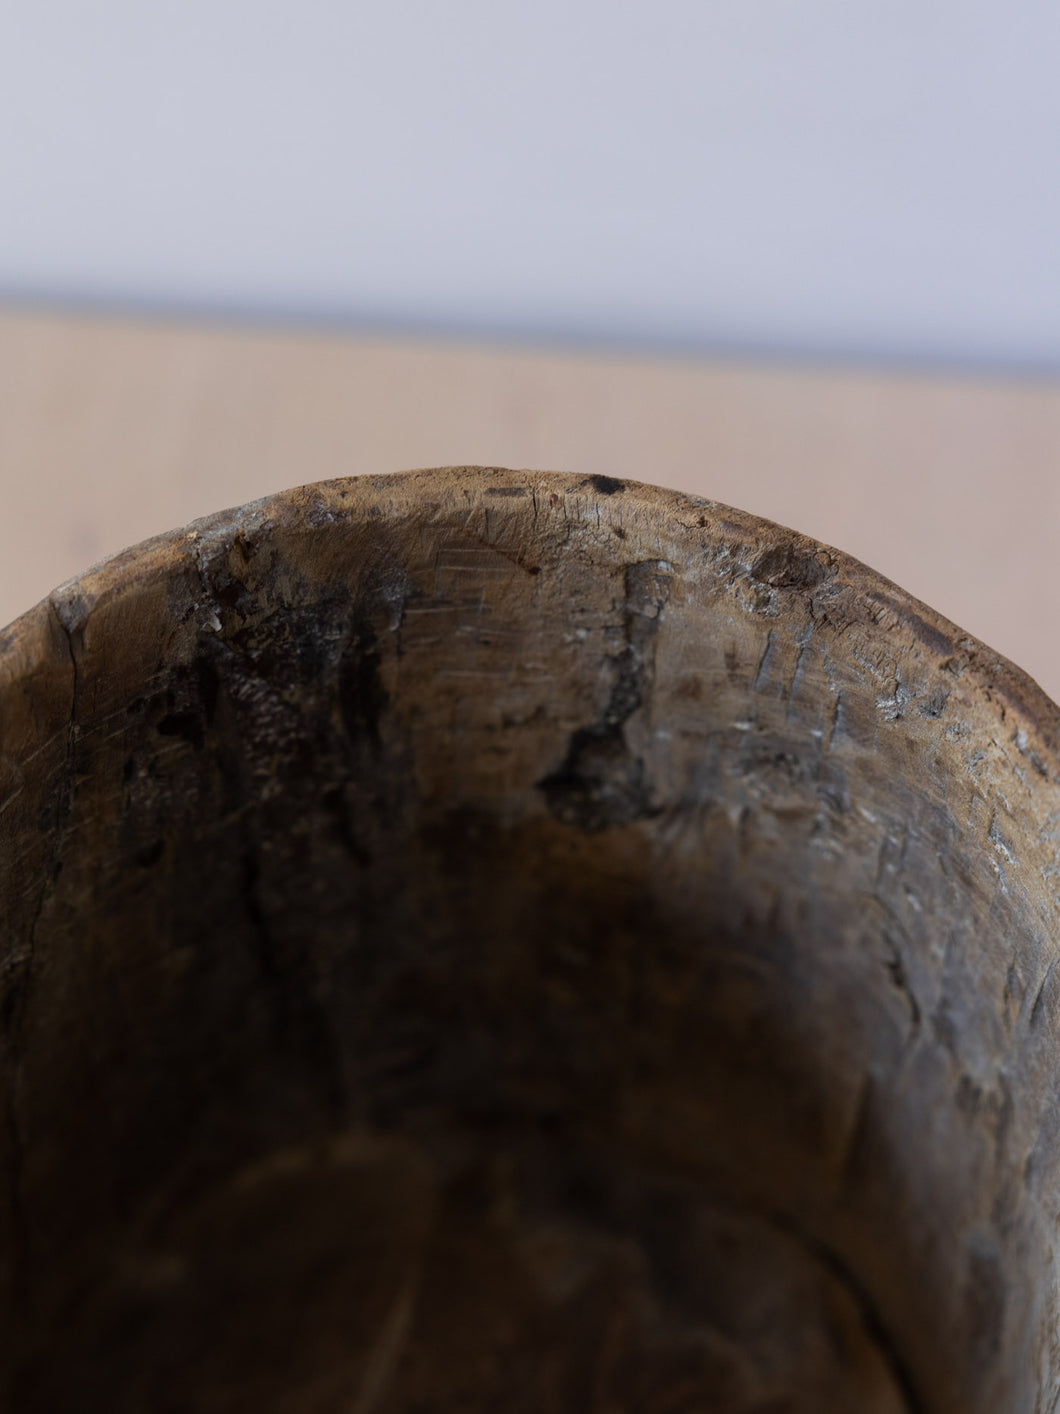 Medium African Vessel with Ring Detail